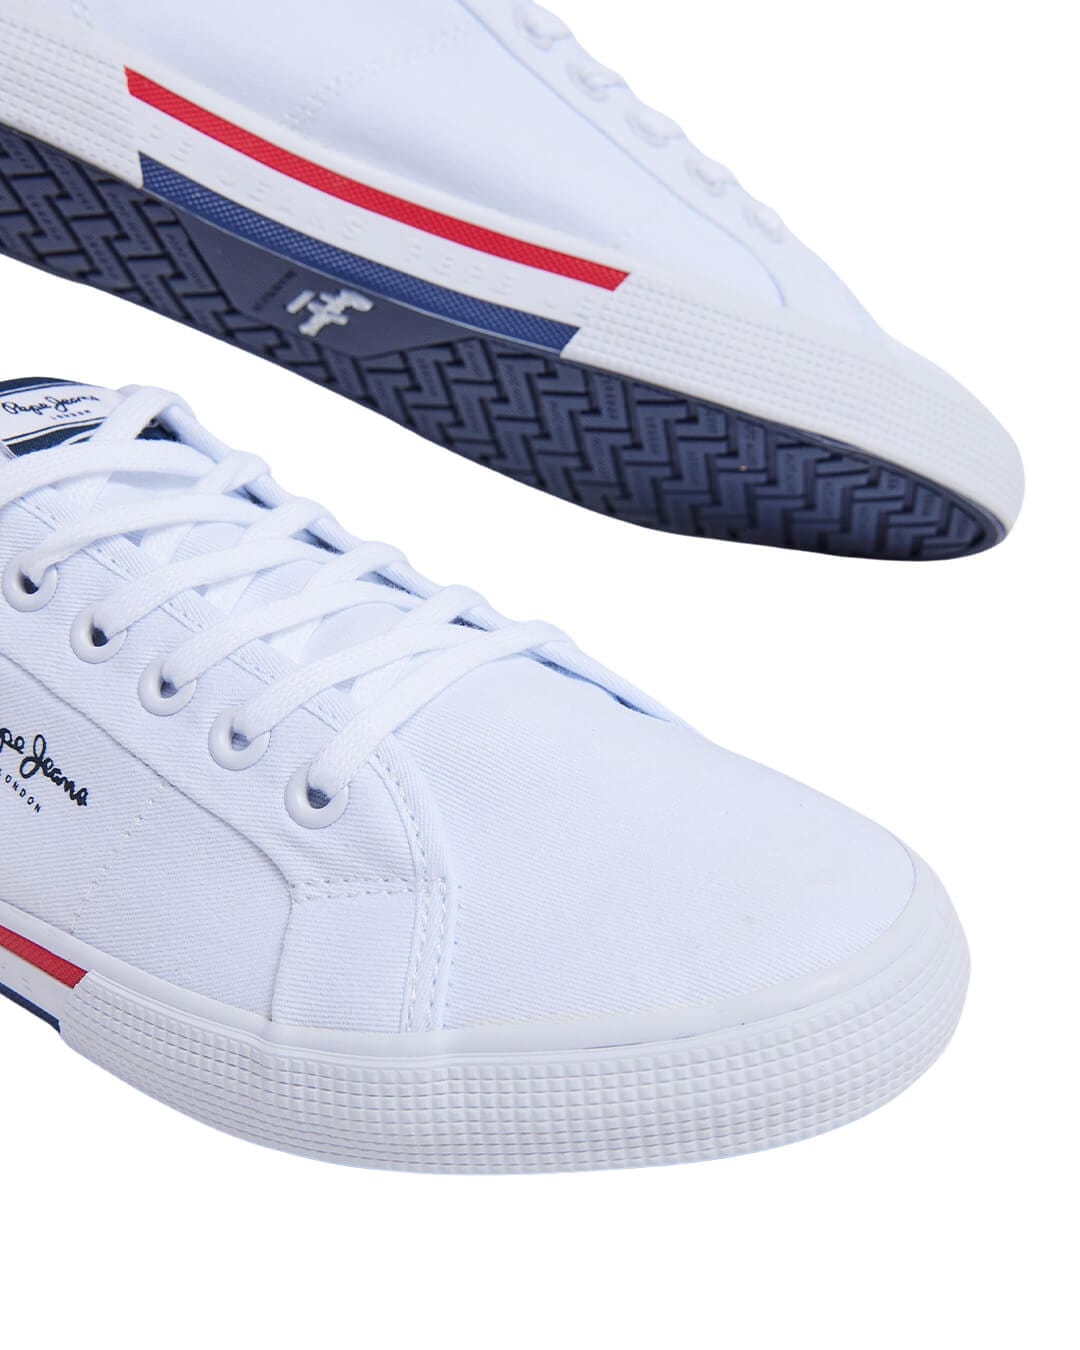 Pepe Jeans Shoes Pepe Jeans White Basic Cotton Trainers